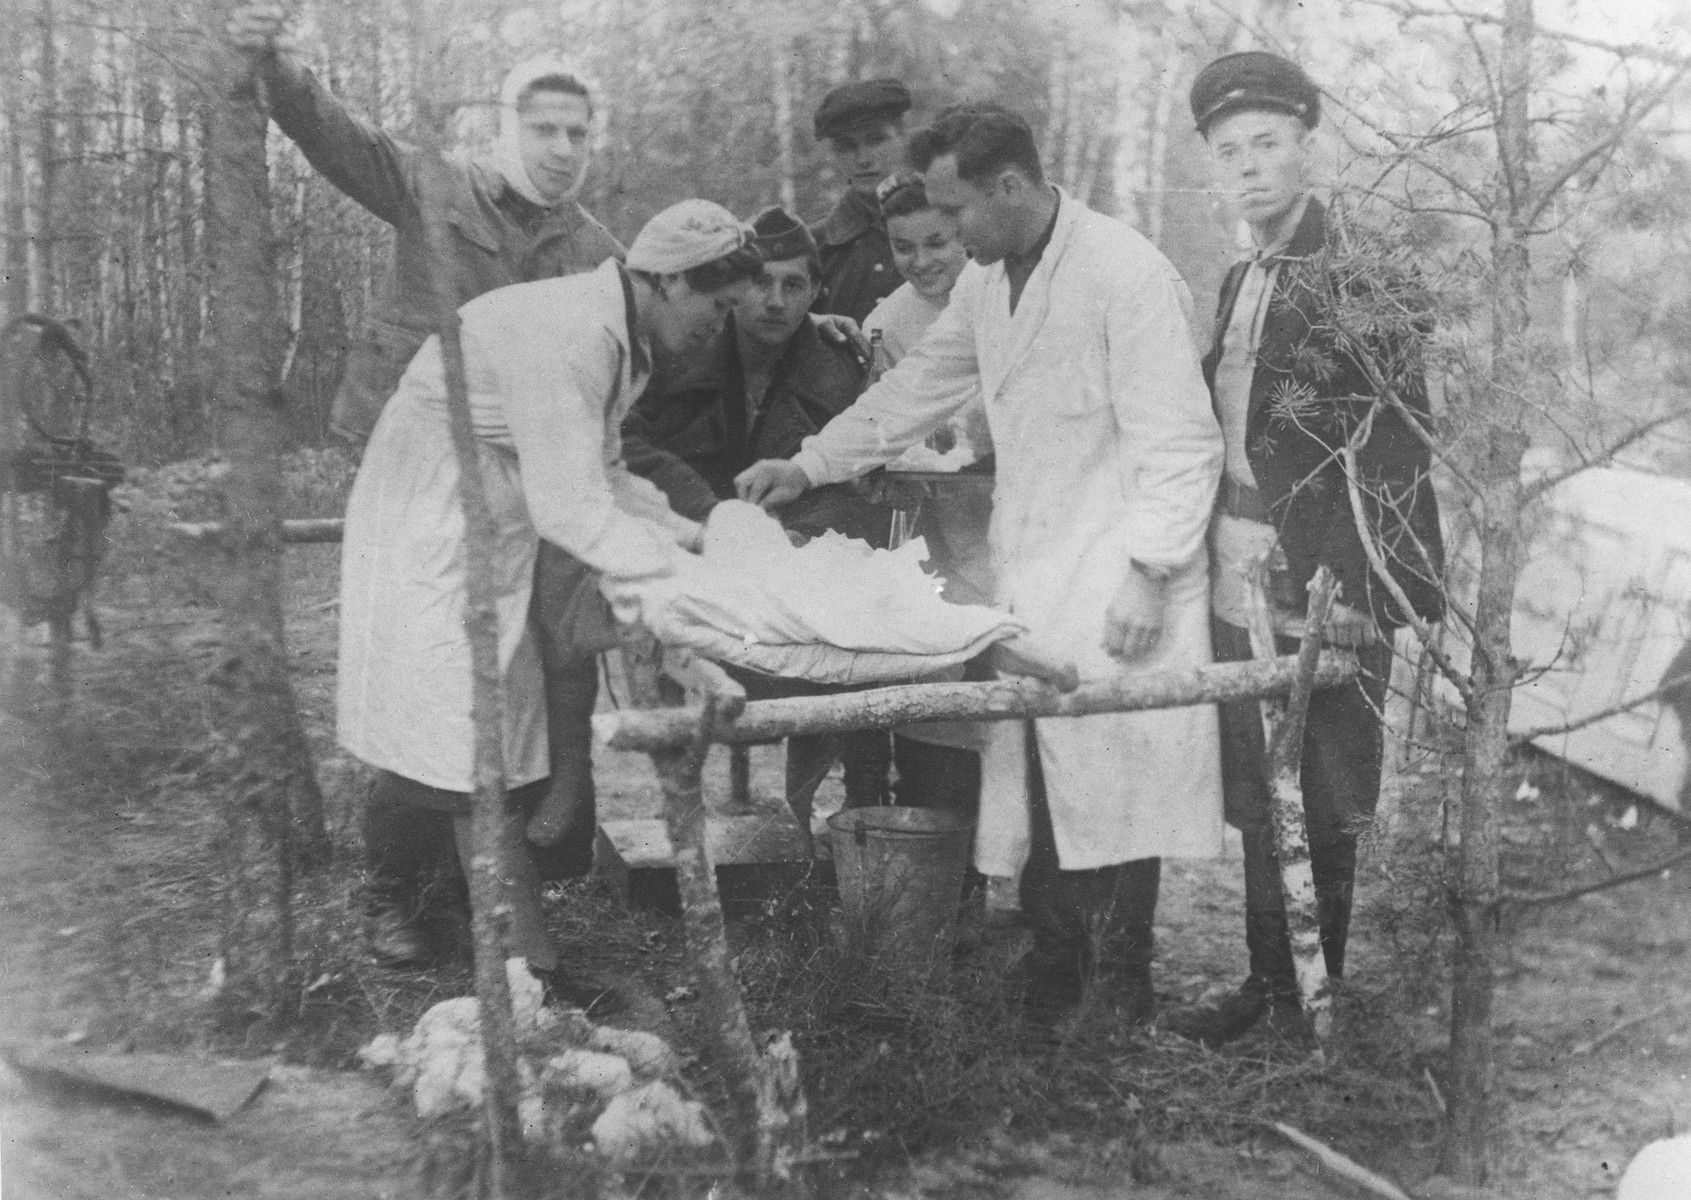 A wounded partisan is treated in a field hospital belonging to the Shish detachment of the Molotov brigade.

Among those pictured are Dr. Ivan Khudyakov, the brigade's physician (second from the right), and Fanya Lazebnik, a photographer and partisan nurse (left).  The wounded partisan's name is Sergei.